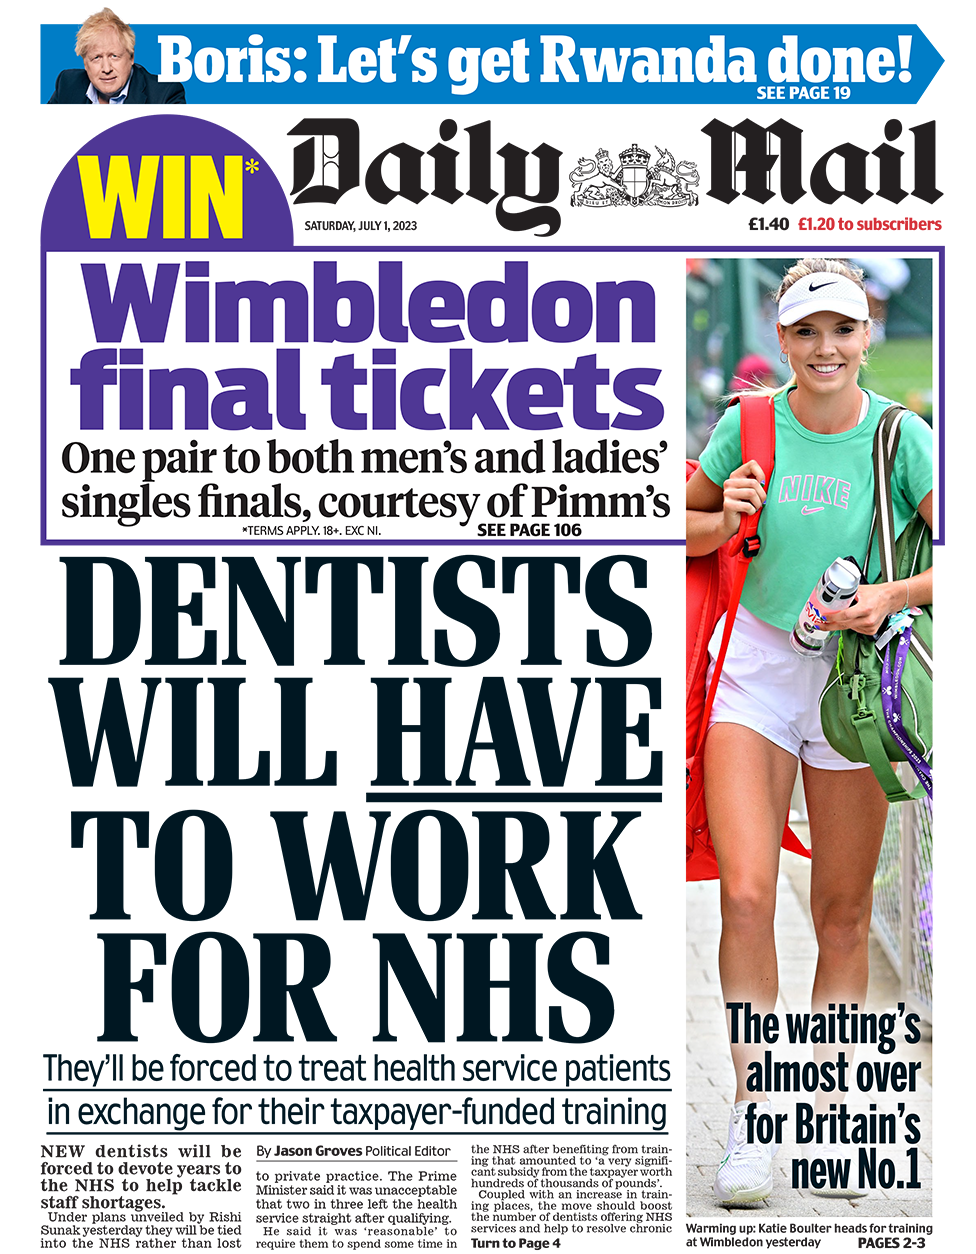 The headline in the Daily Mail reads: "Dentists will have to work for NHS"